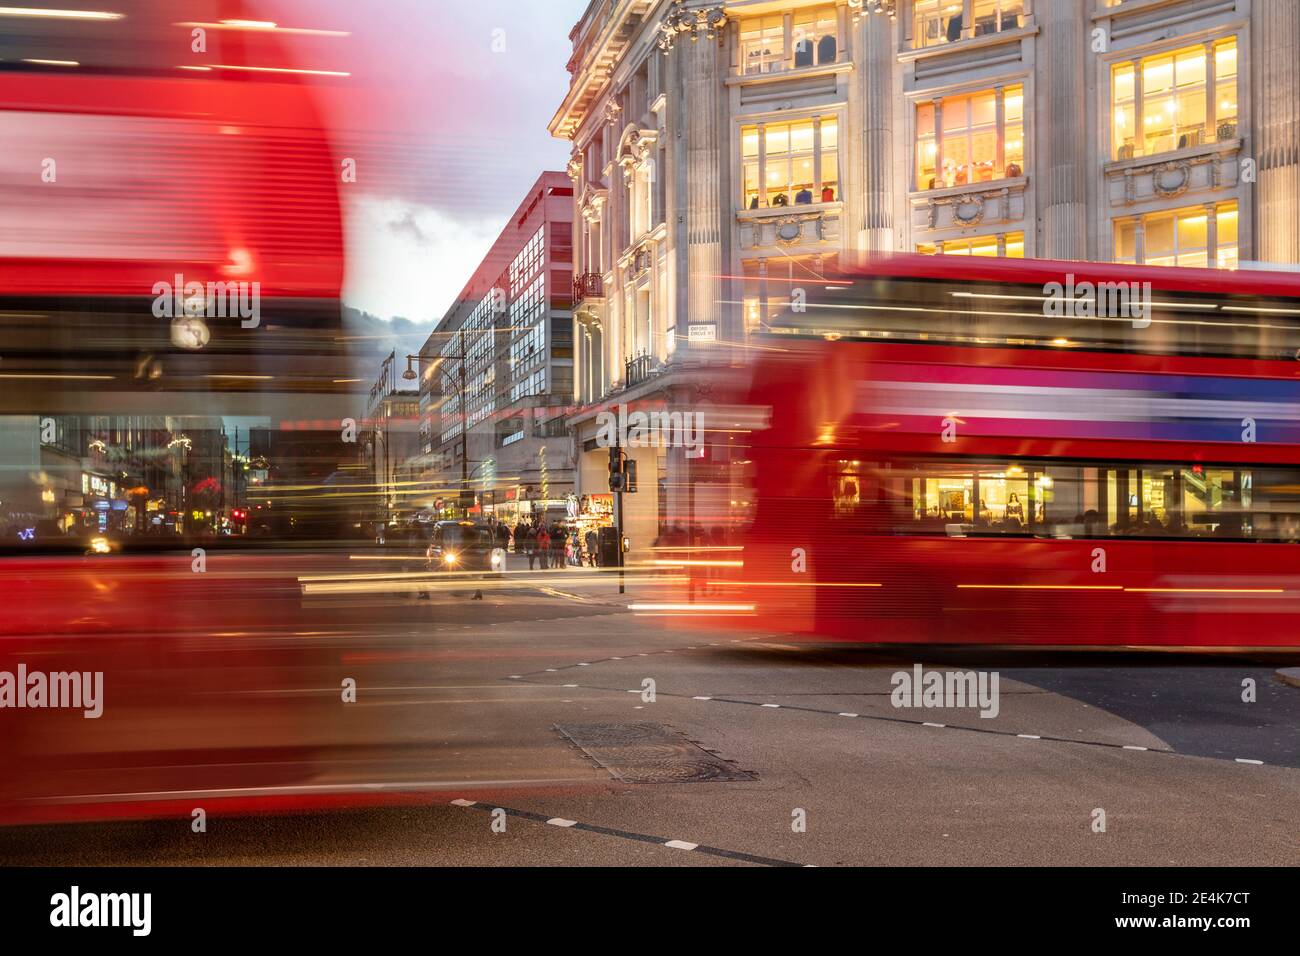 UK, London, Red double decker bus crossing Oxford Circus junction at dusk, blurred Stock Photo